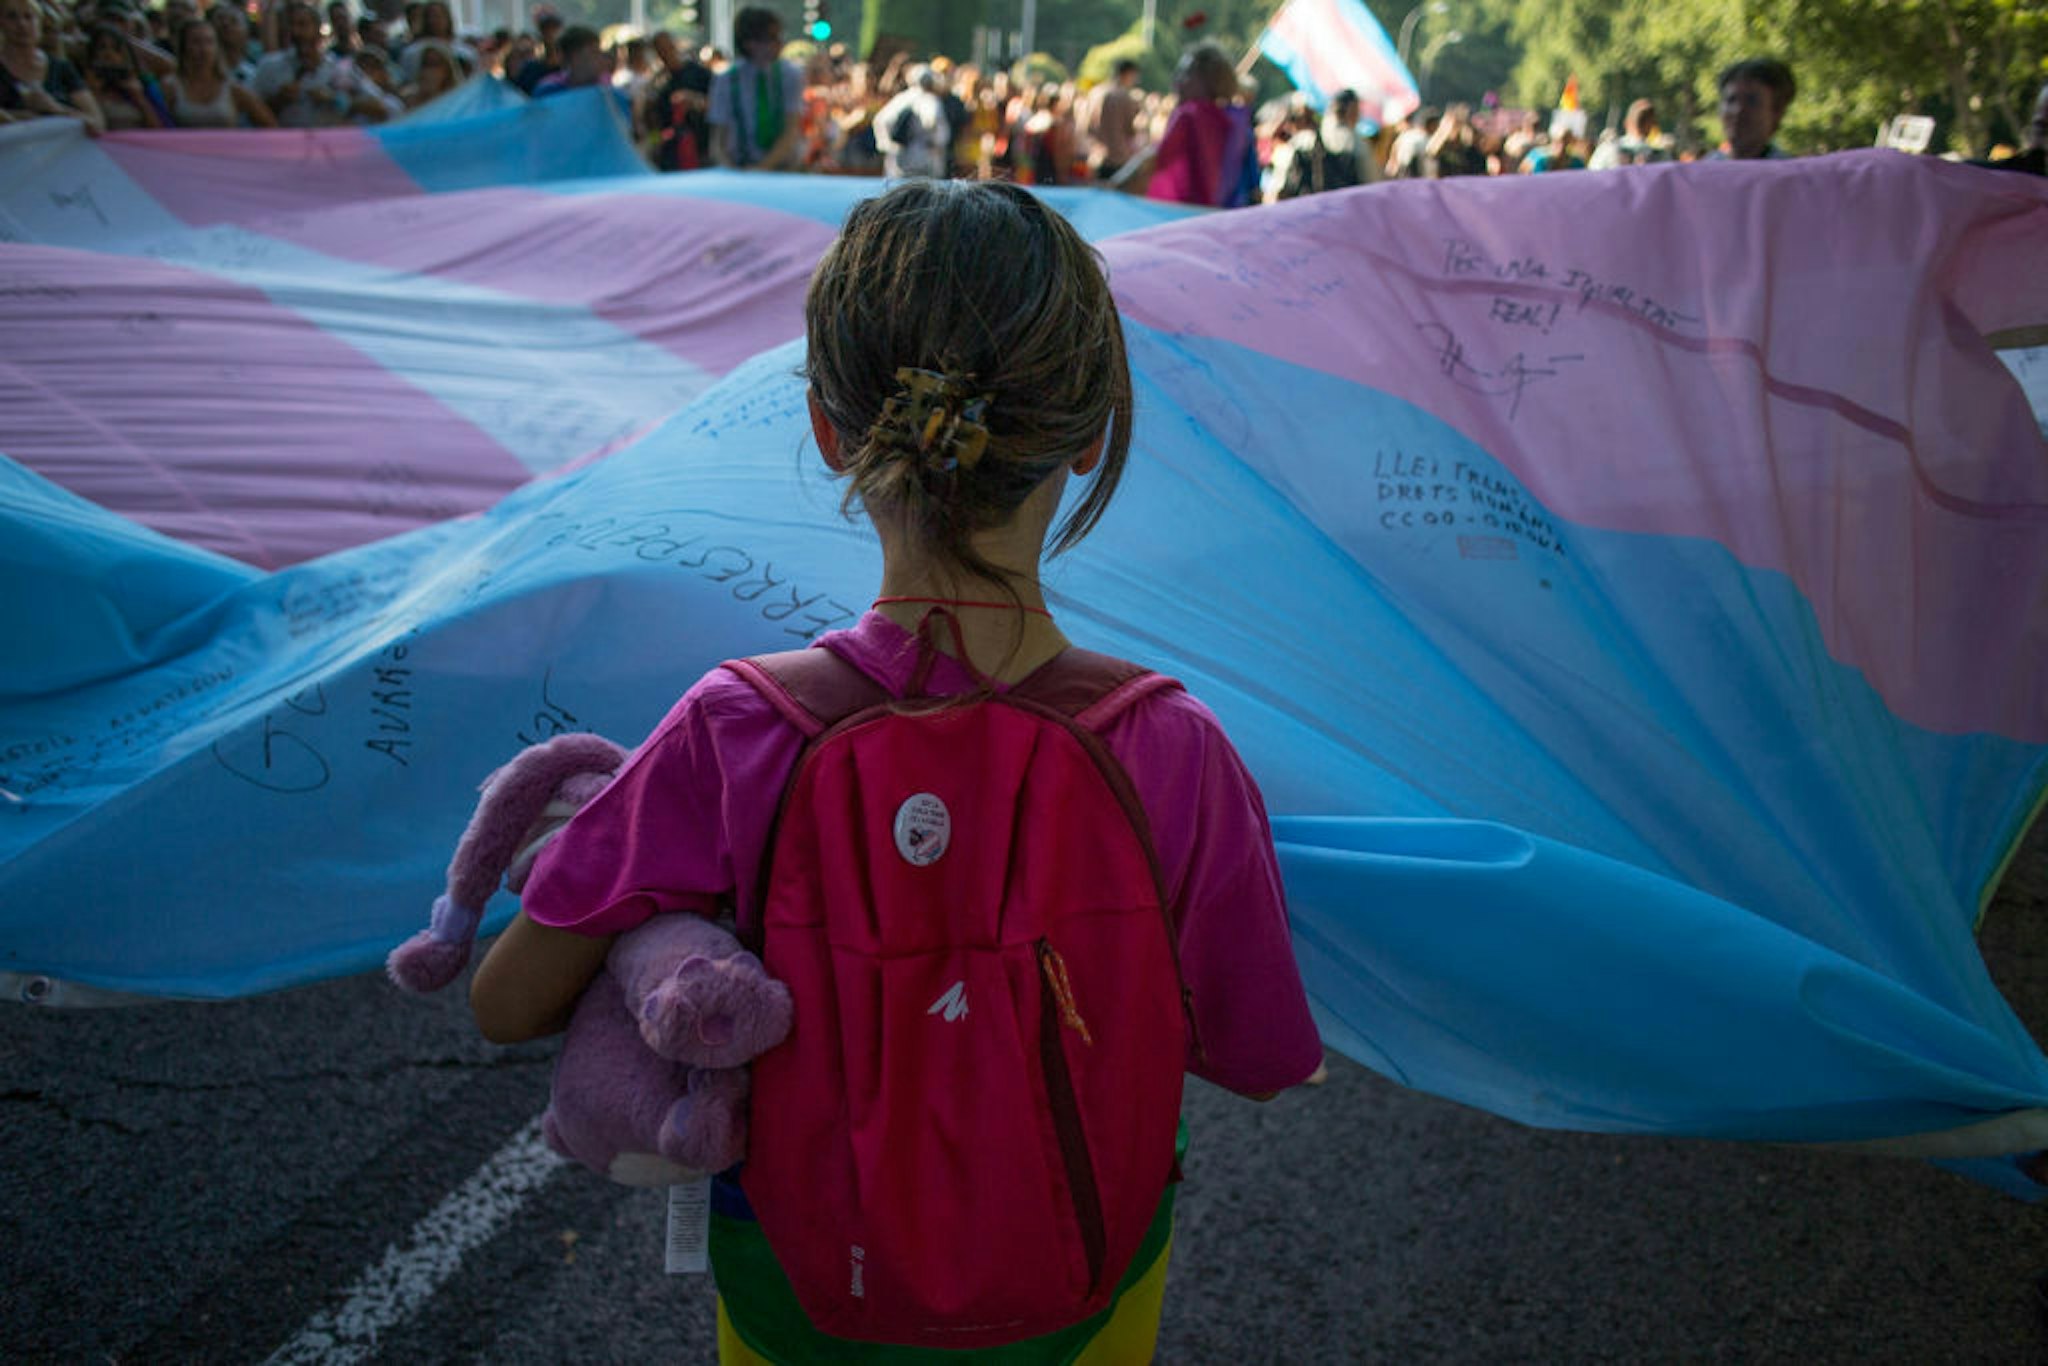 MADRID, SPAIN - 2022/07/09: A girl holds the Transgender Pride flag during the pride march held in one of the most important streets of Madrid. Thousands of people participated in the Madrid pride parade. After two years the march returned to normal with its floats that have characterised it years ago. (Photo by Luis Soto/SOPA Images/LightRocket via Getty Images)